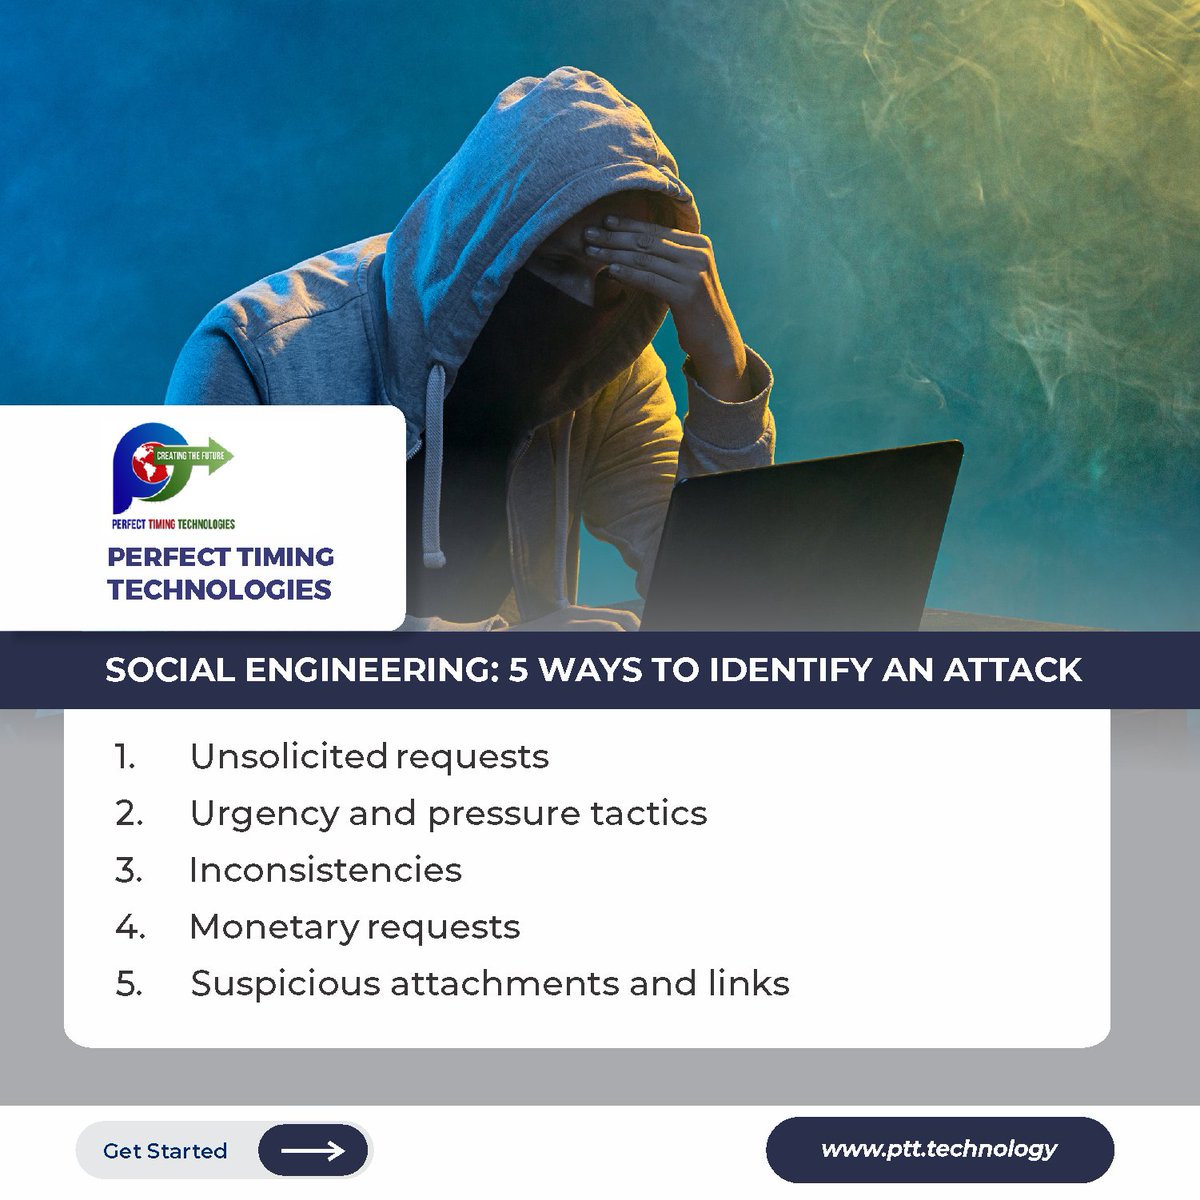 Social Engineering: 5 Ways to Identify an Attack

Read here: blog.symquest.com/social-enginee… 

#SocialEngineering #CyberSecurity #OnlineSafety #InfoSec #DataProtection #TechSecurity #SecurityAwareness #Phishing #CyberThreats #PerfectTimingTechnology #PerfectTimingHolding